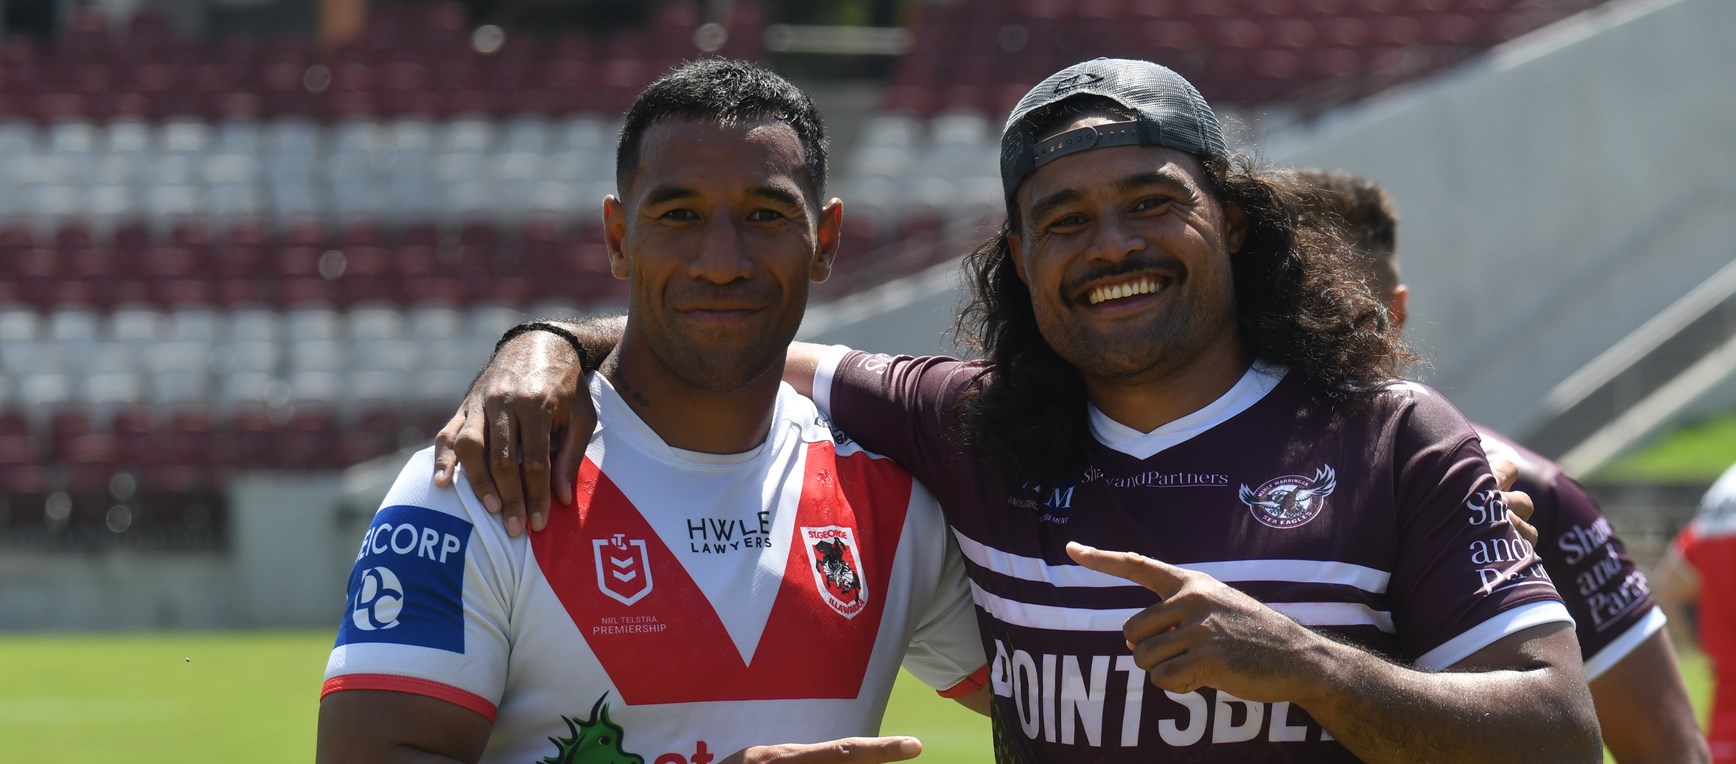 Manly Sea Eagles opposed session